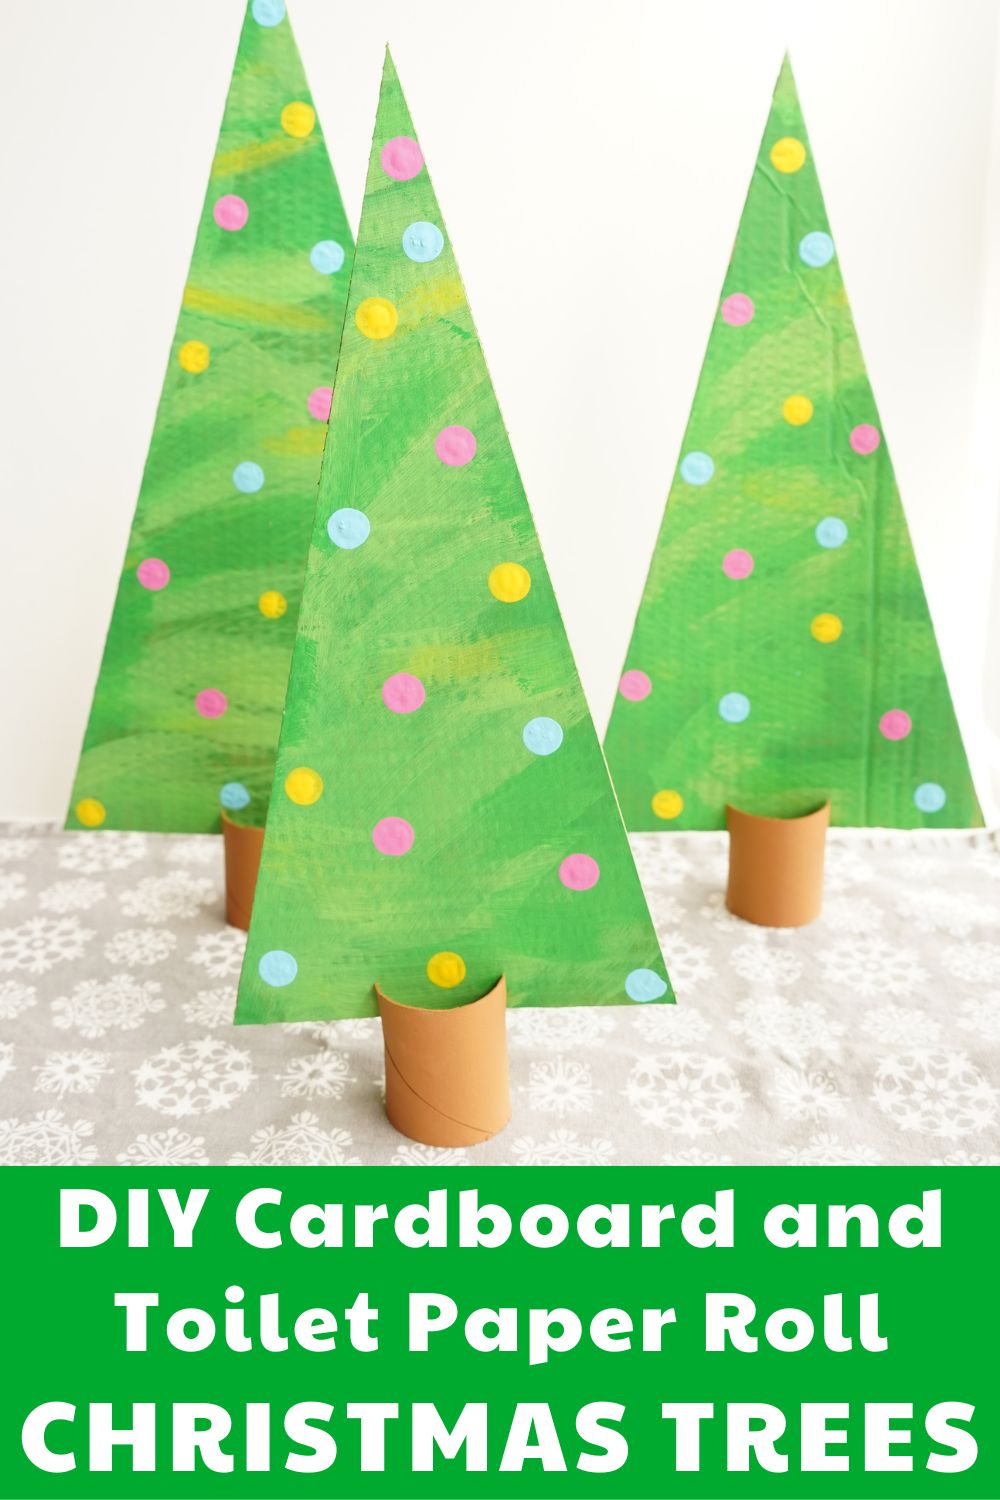 3 DIY Cardboard and Toilet Paper Roll CHRISTMAS TREES pin image